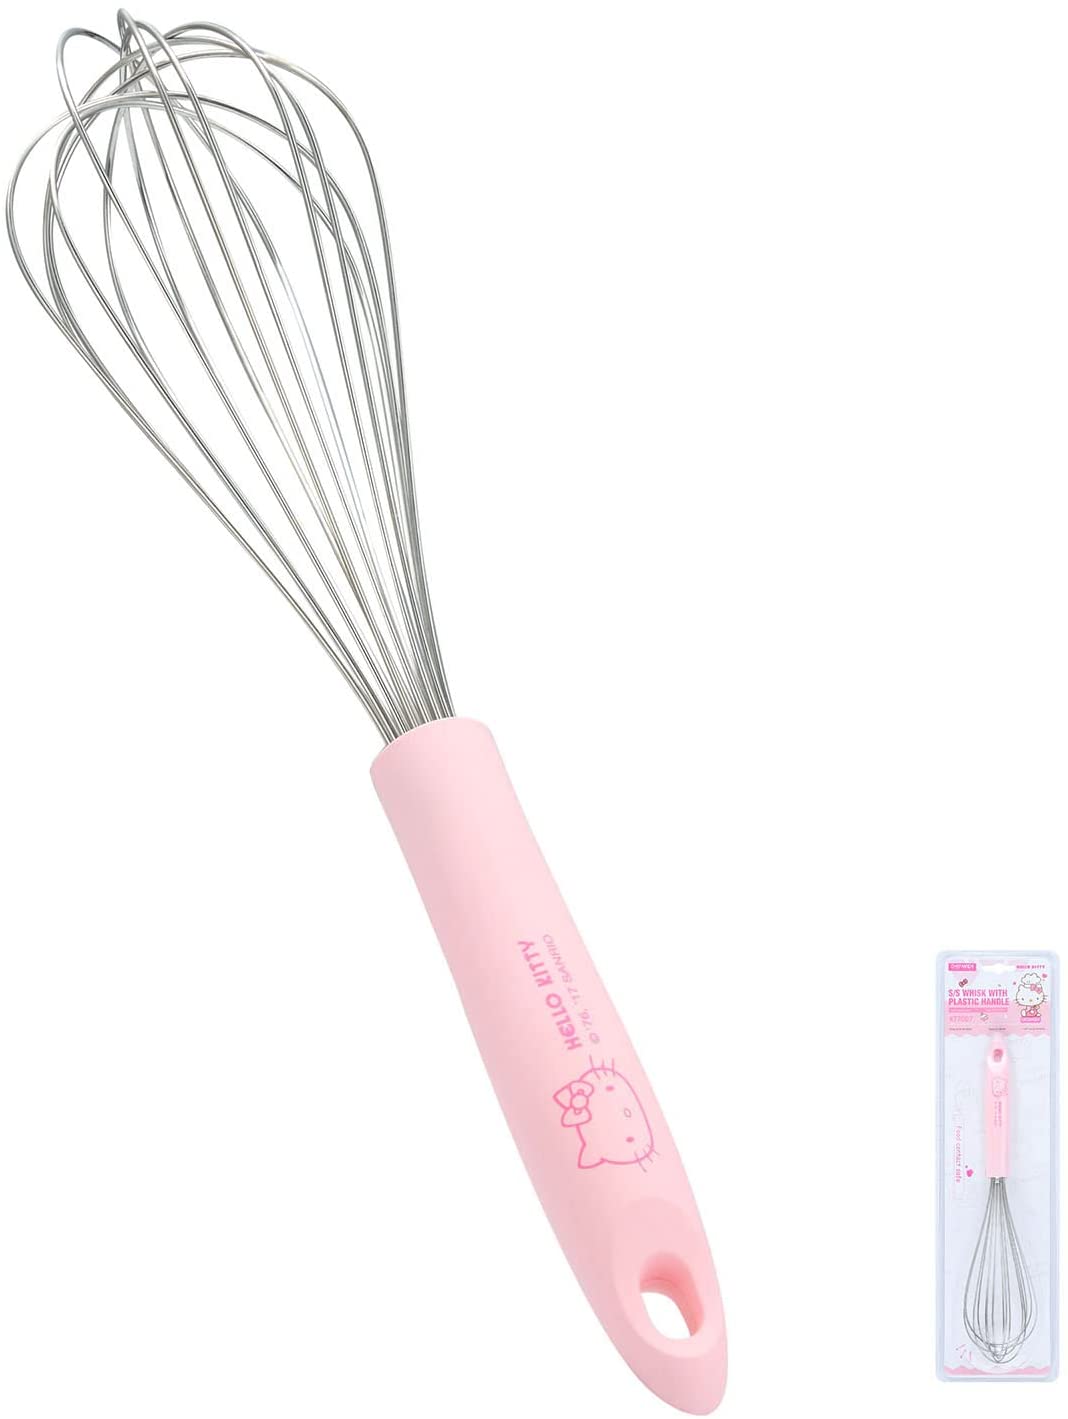 Chefmade學廚KT7007正版Hello kitty不鏽鋼手動打蛋器11" Hello Kitty Whisk